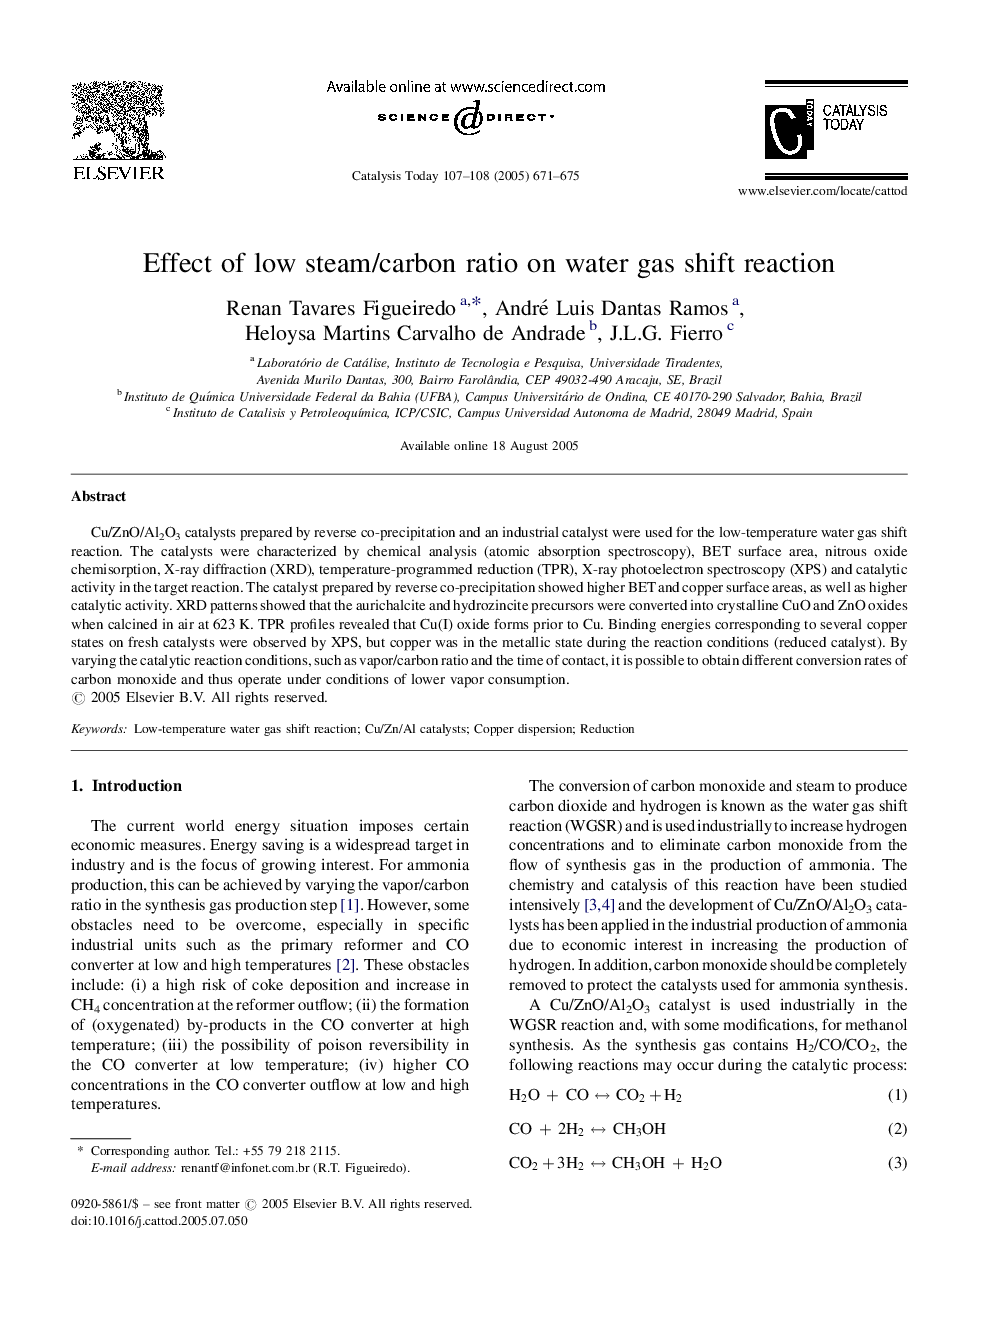 Effect of low steam/carbon ratio on water gas shift reaction